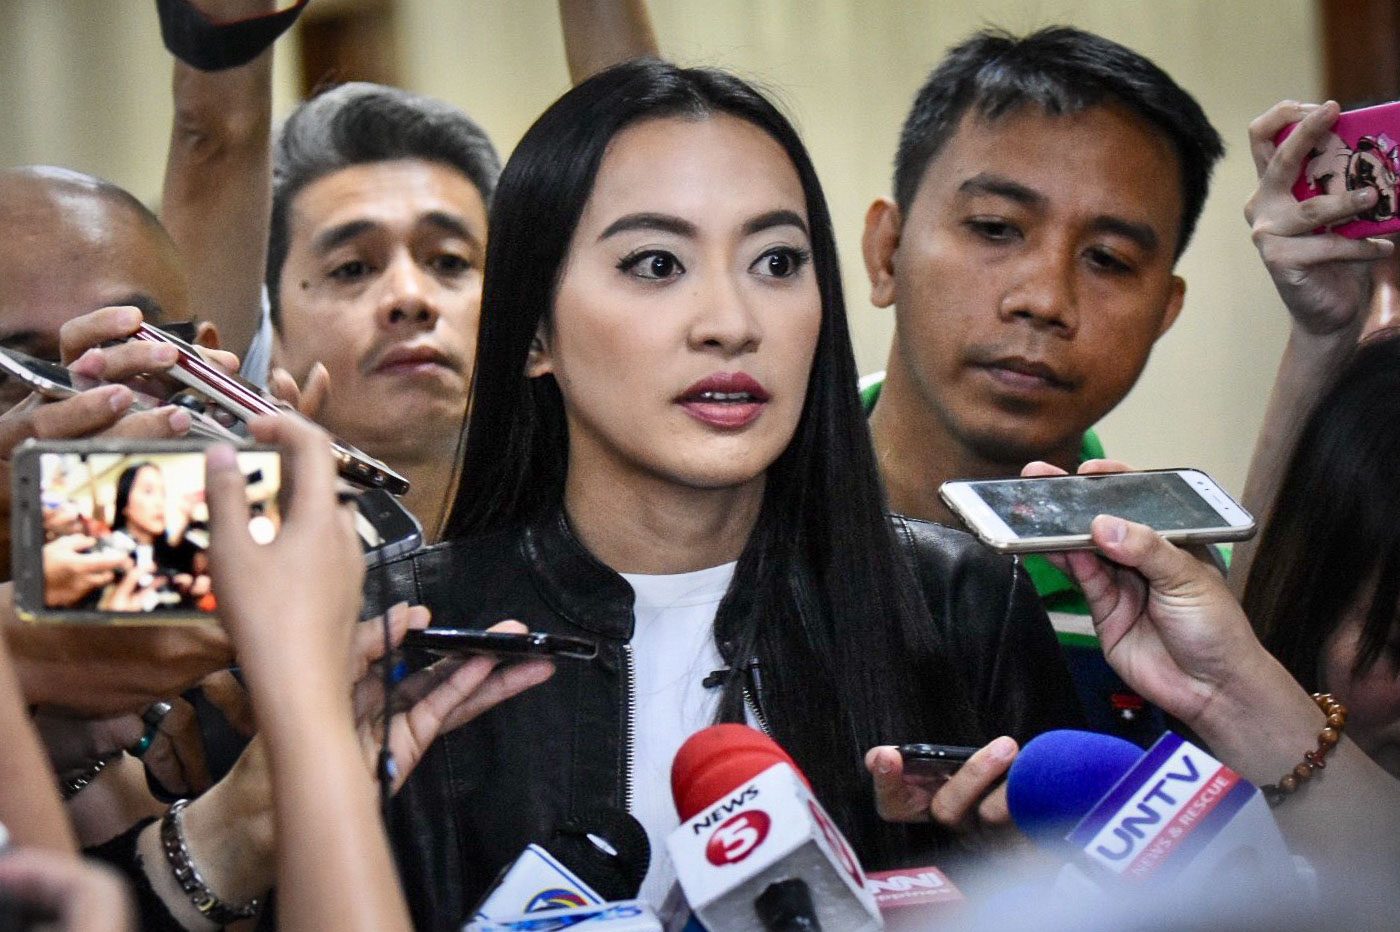 Mocha Uson’s resignation long overdue ‘but whiff of fresh air’ – lawmakers